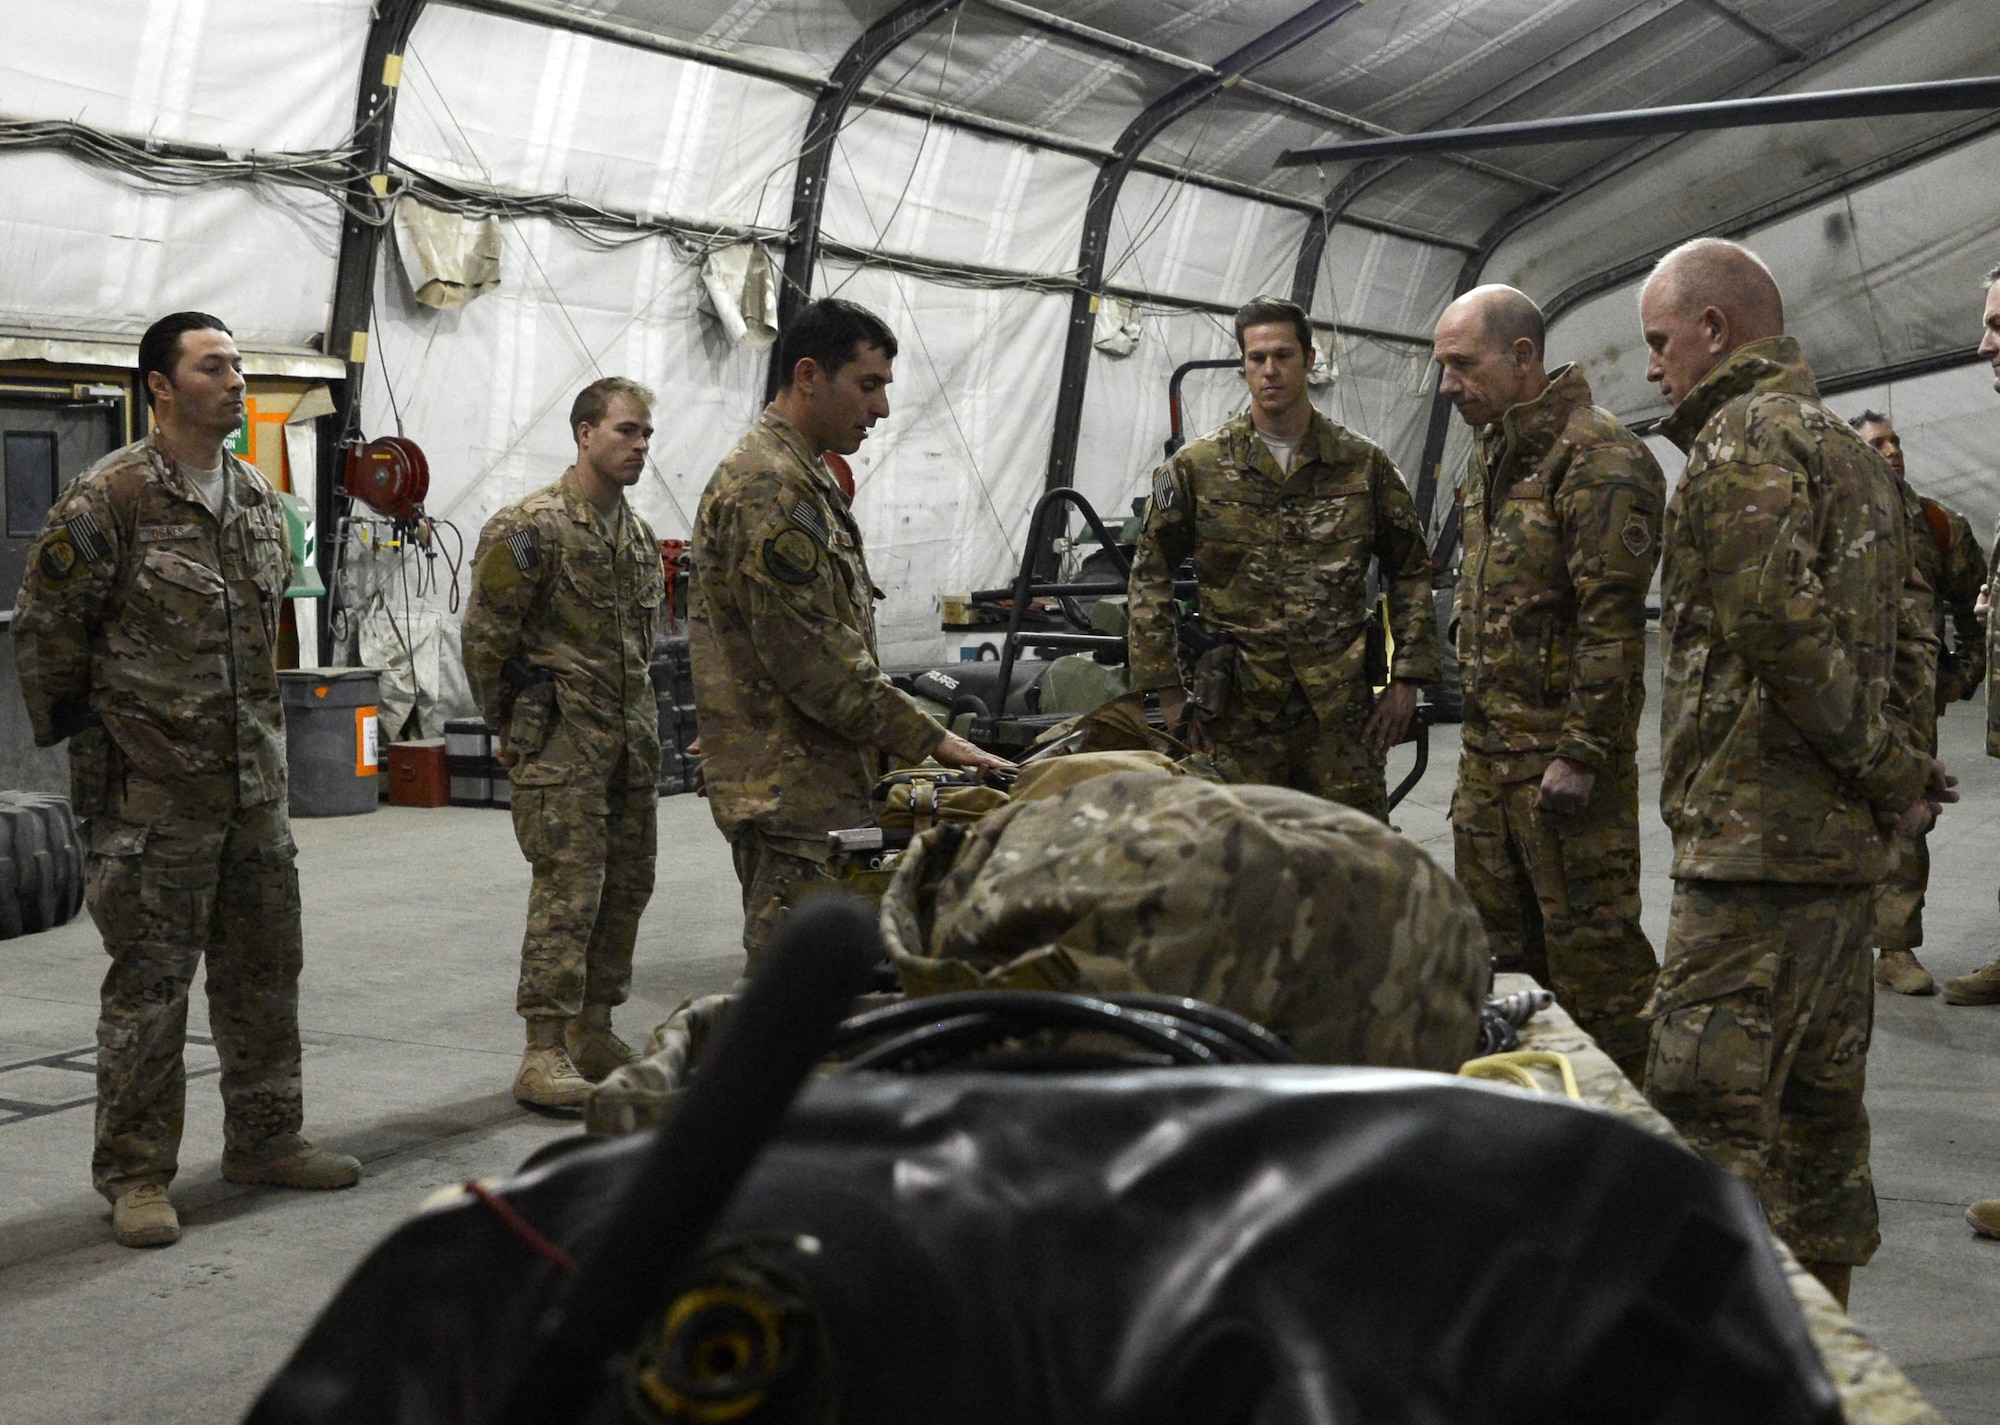 Gen. Mike Holmes, commander of Air Combat Command, and Chief Master Sgt. Frank Batten, ACC command chief, visits Airmen from the 83rd Expeditionary Rescue Squadron Feb. 9, 2018 at Bagram Airfield, Afghanistan.